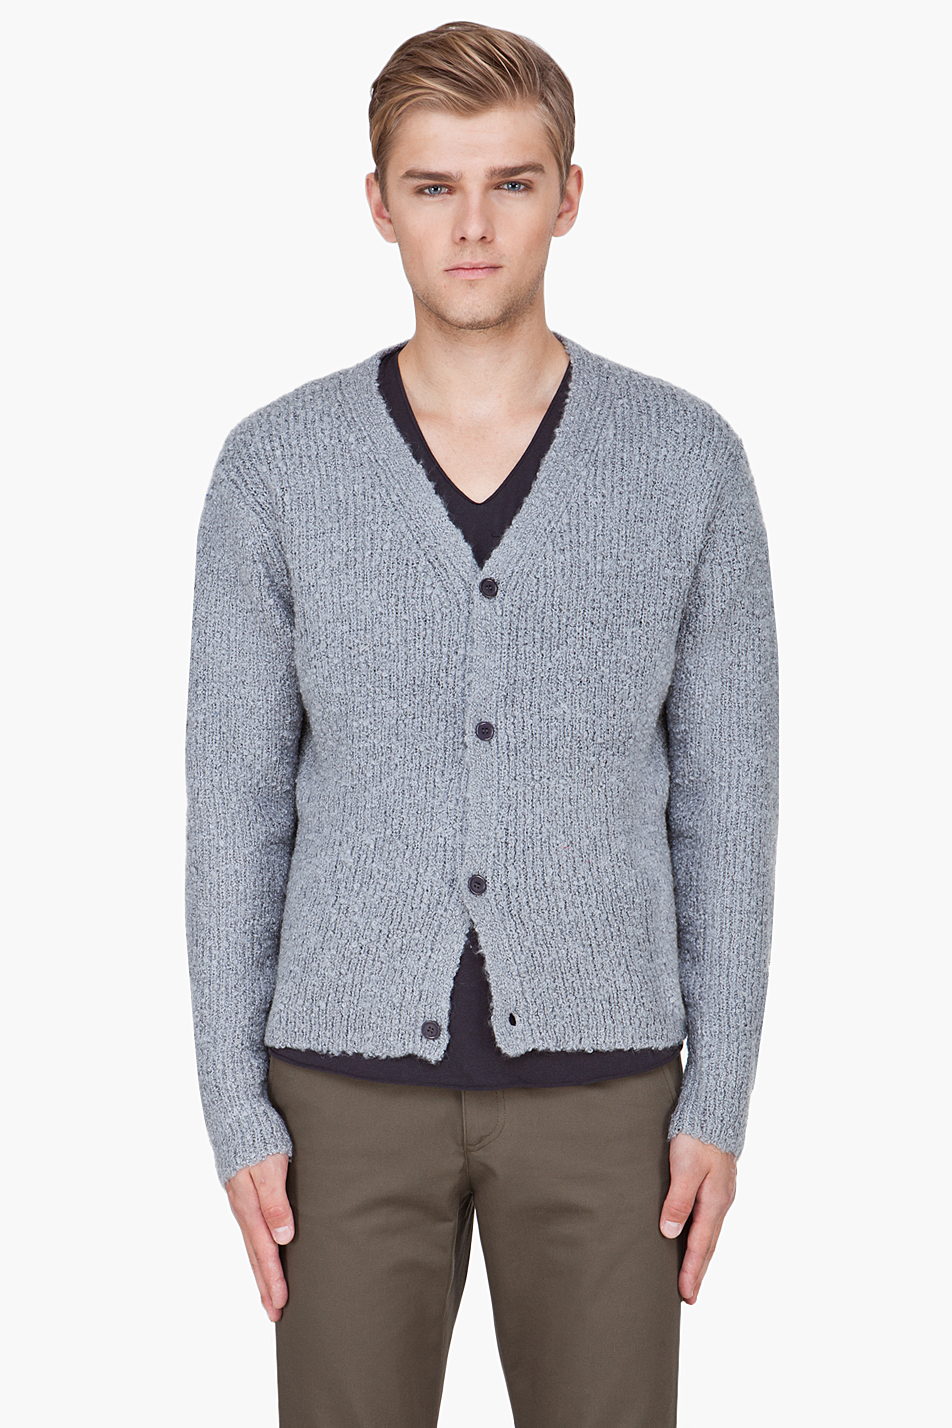 Lyst - Opening Ceremony Curly Mohair Cardigan in Gray for Men